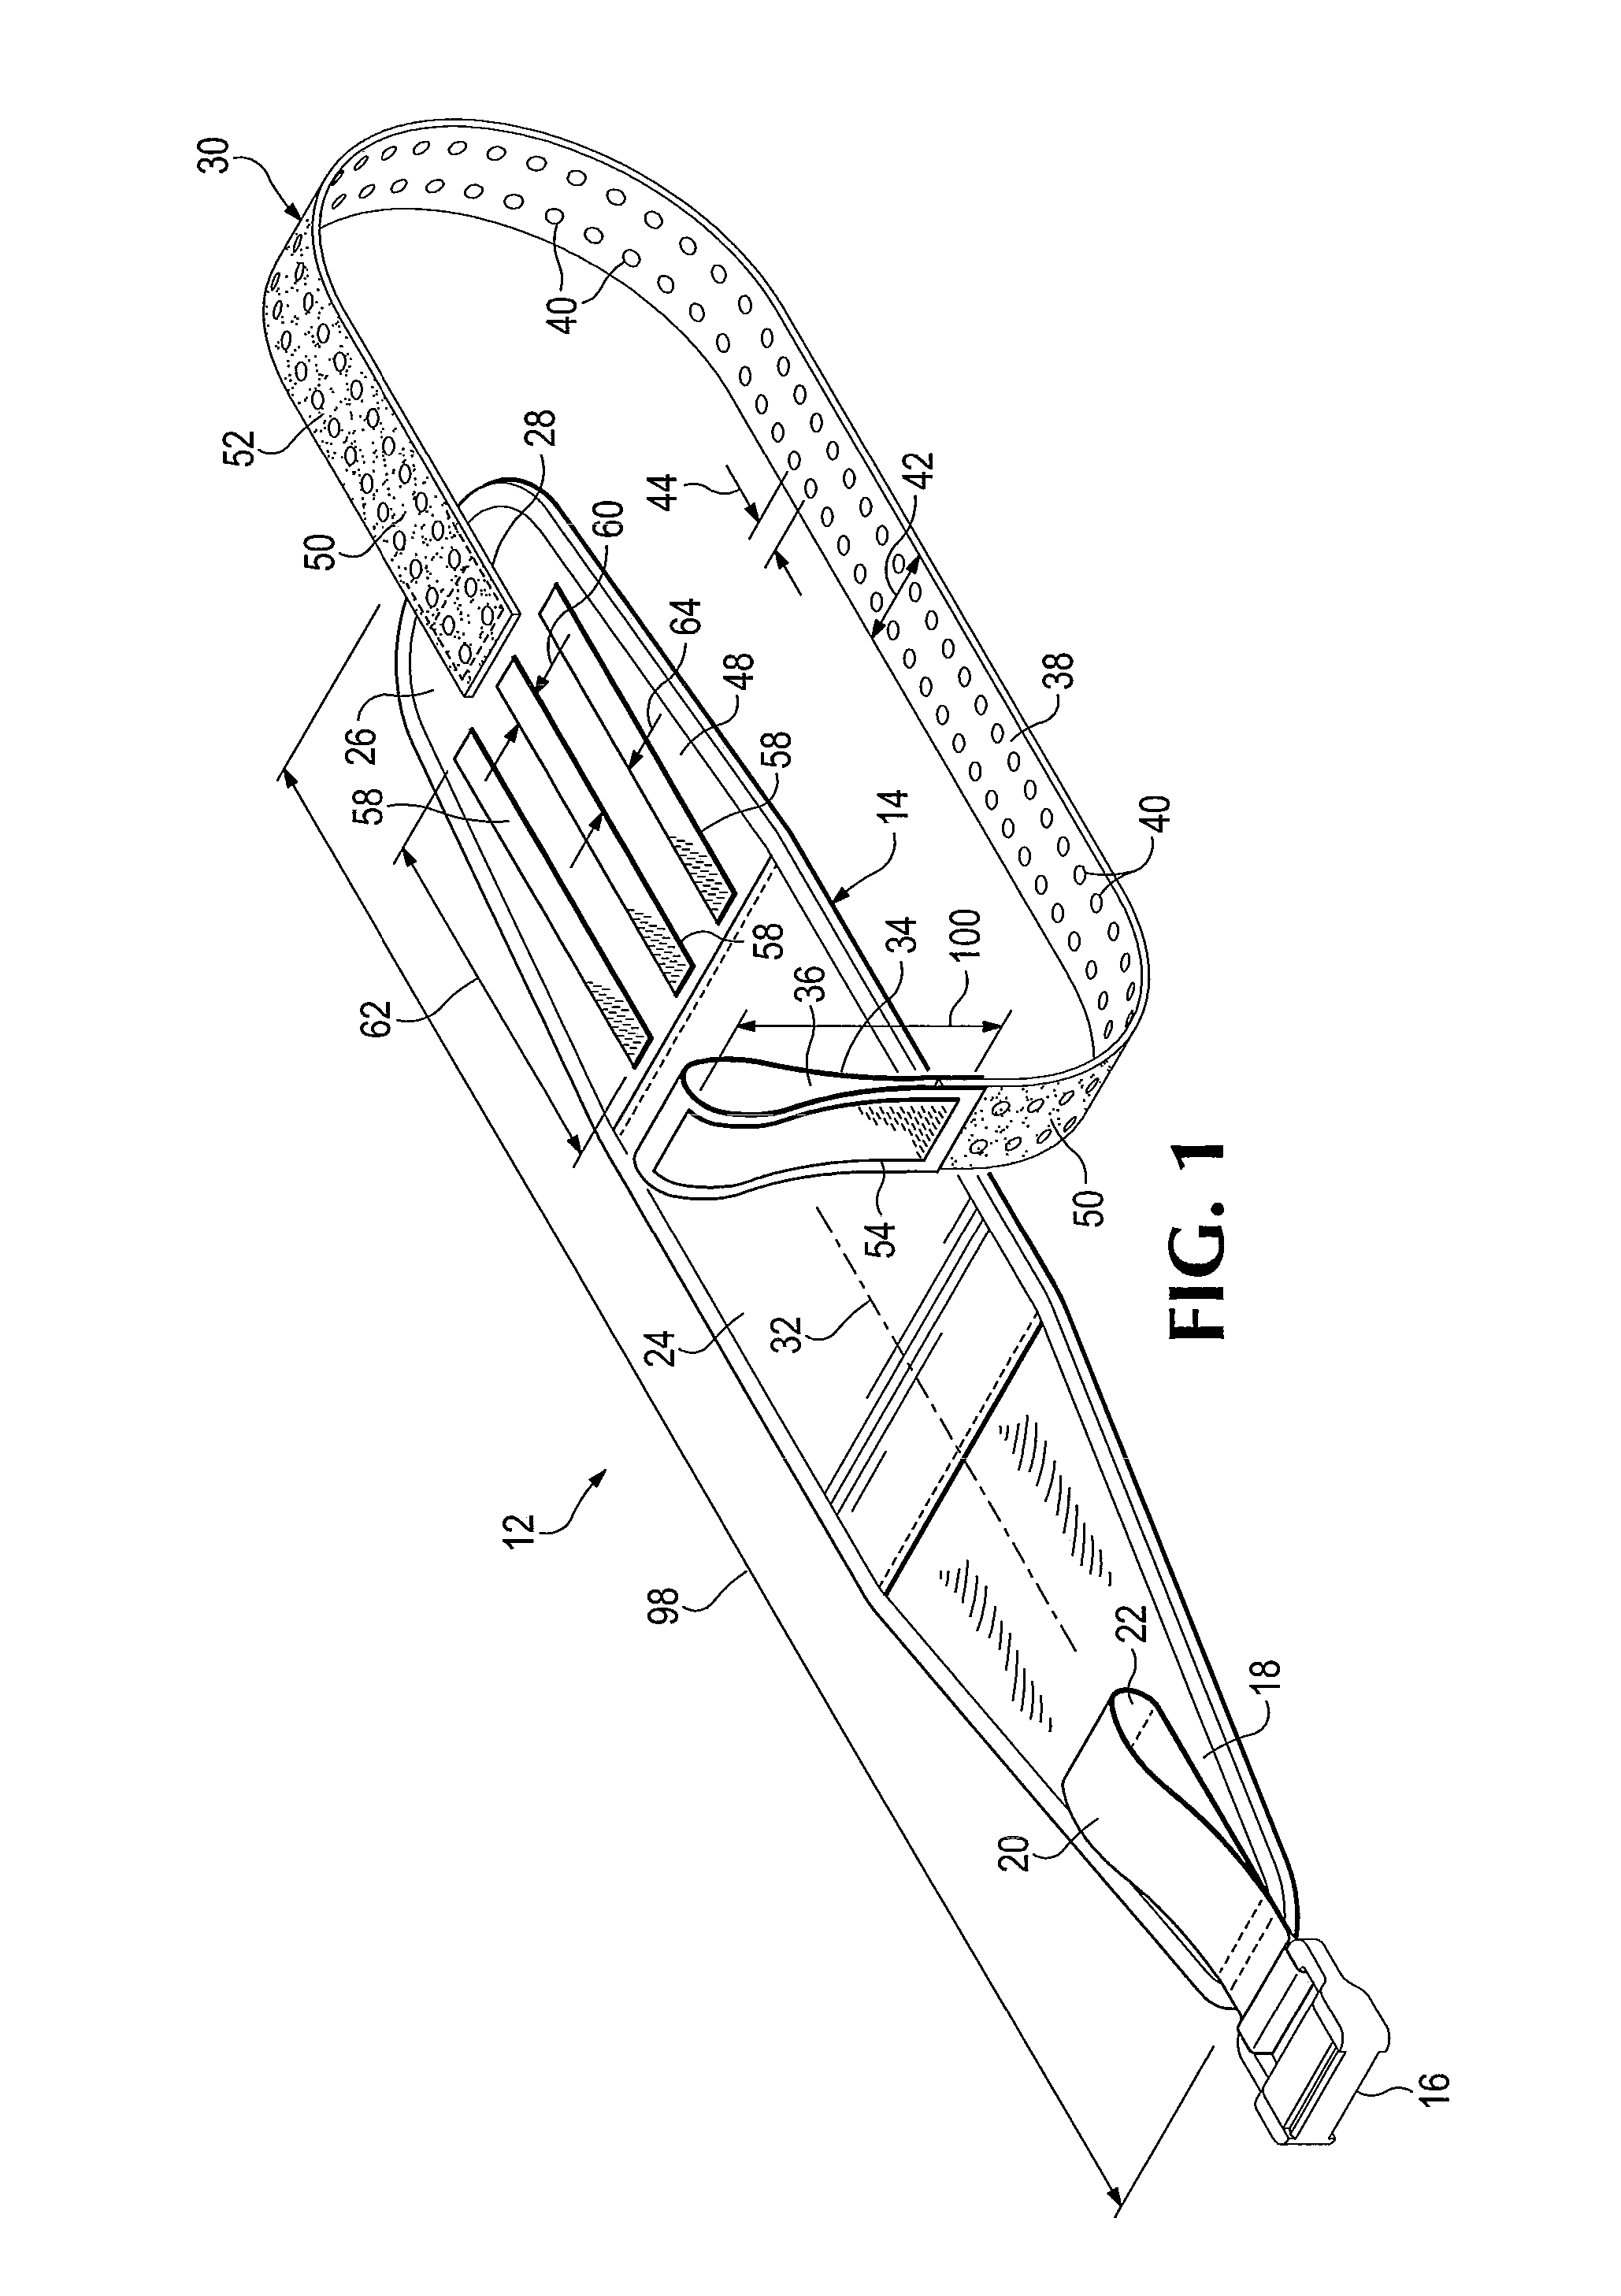 Device for control of hemorrhage including stabilized point pressure device